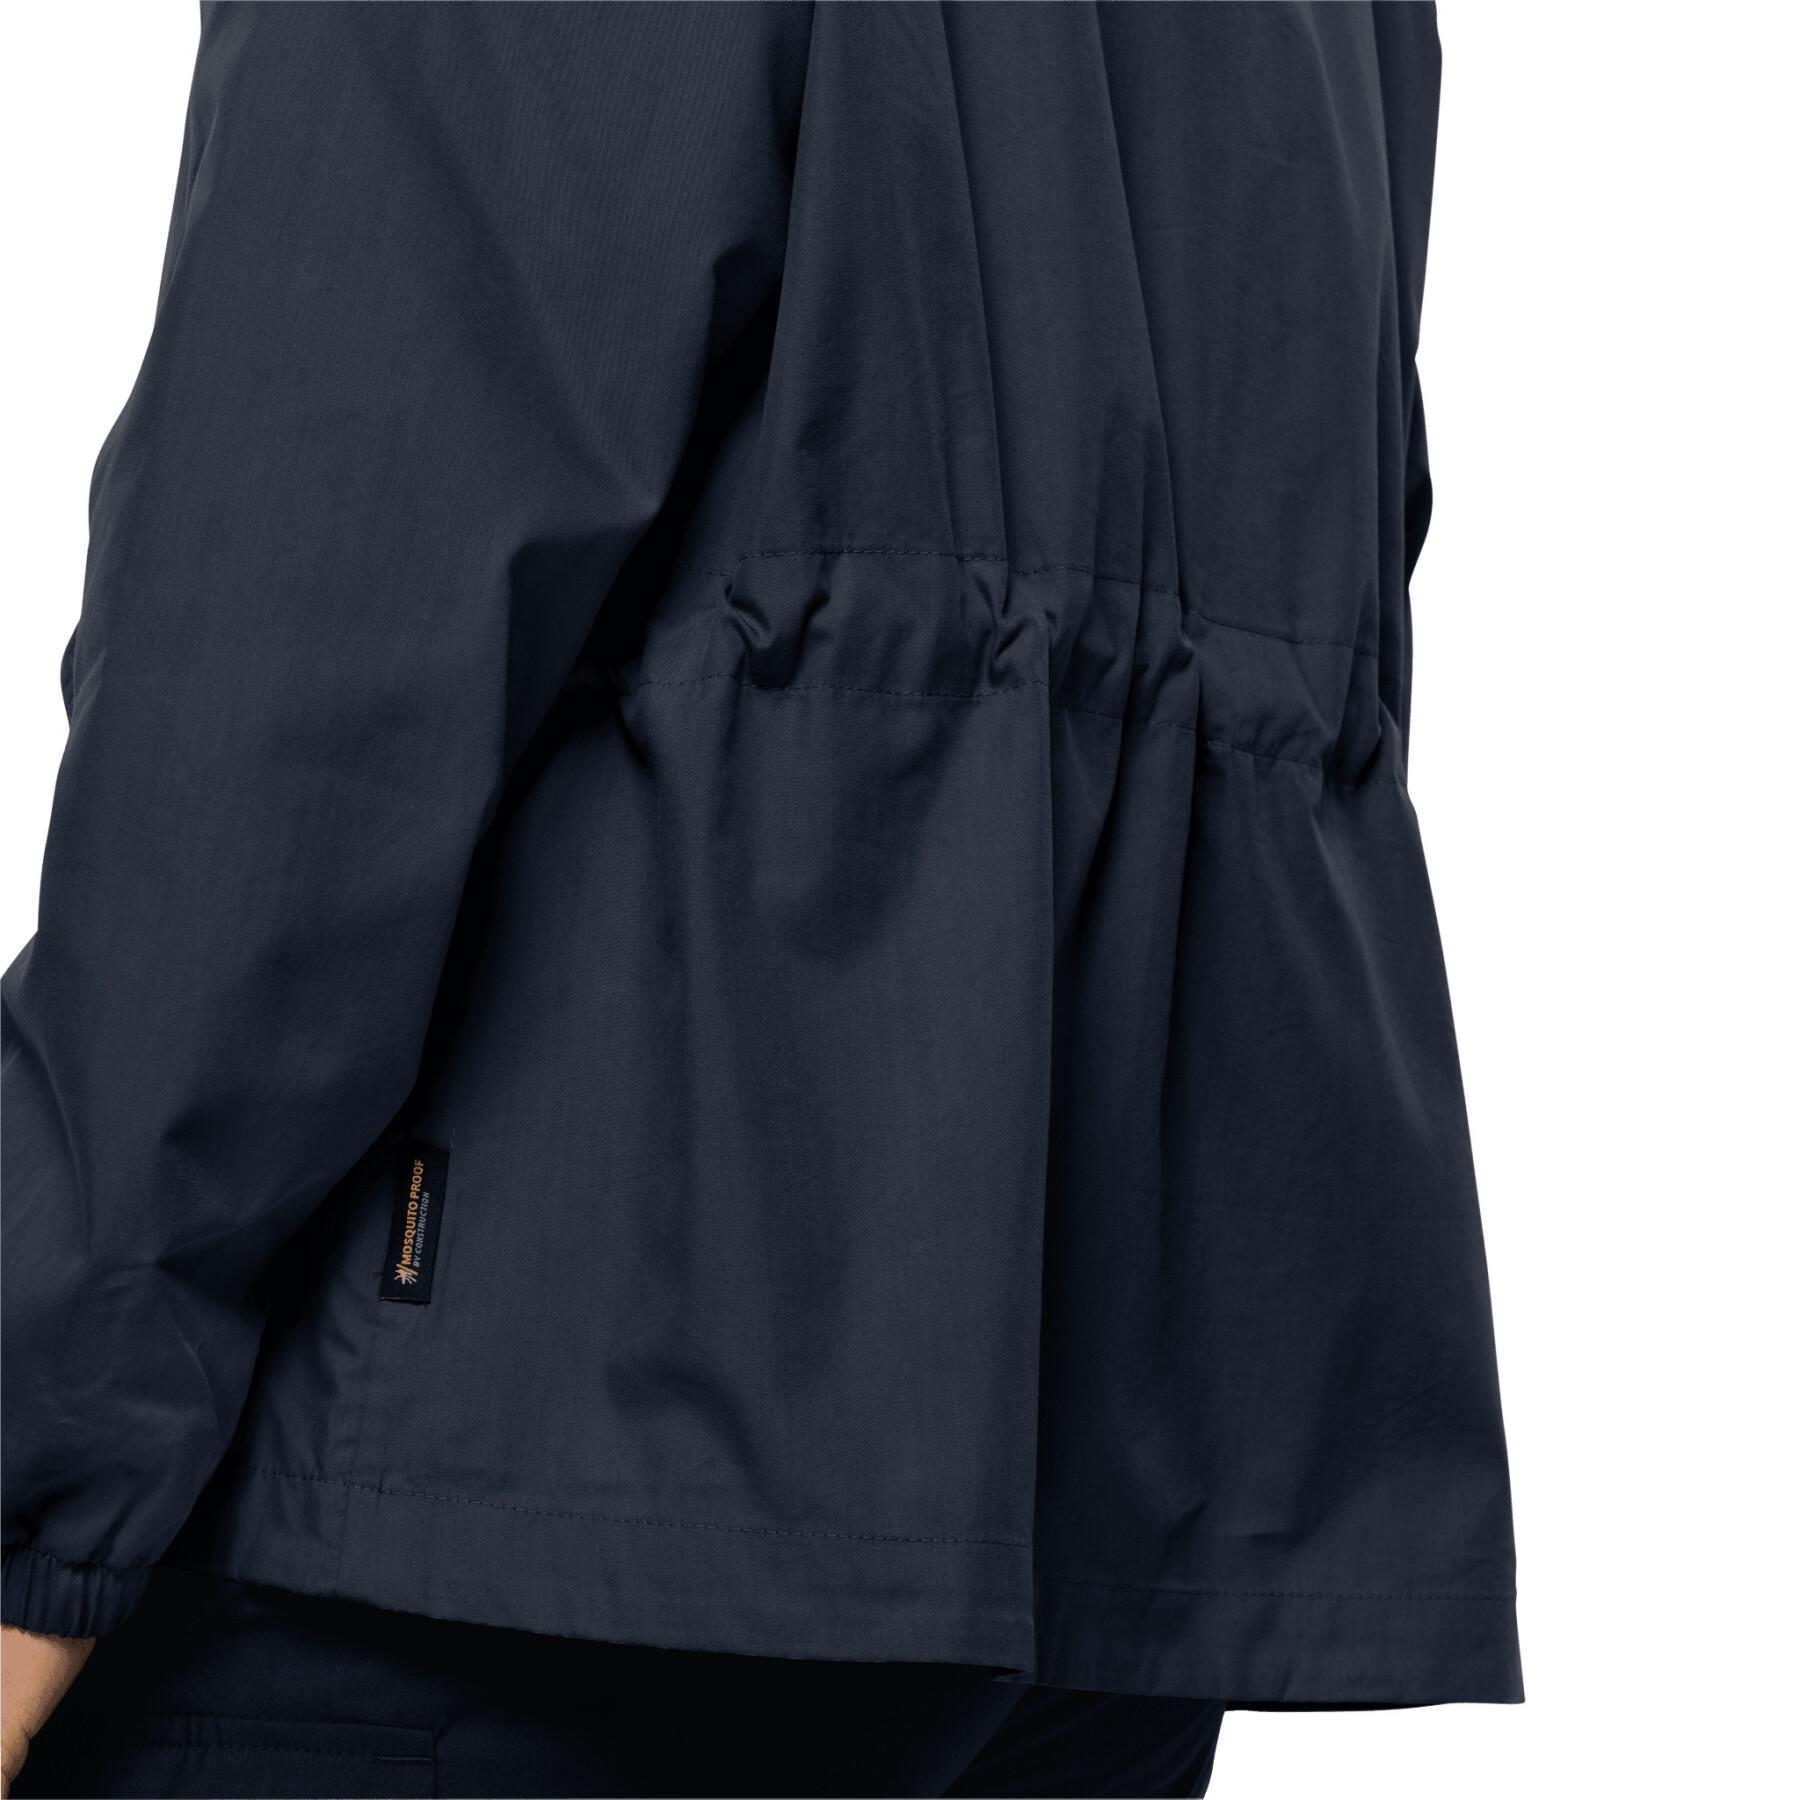 Chaqueta impermeable para mujer Jack Wolfskin Lakeside Trip